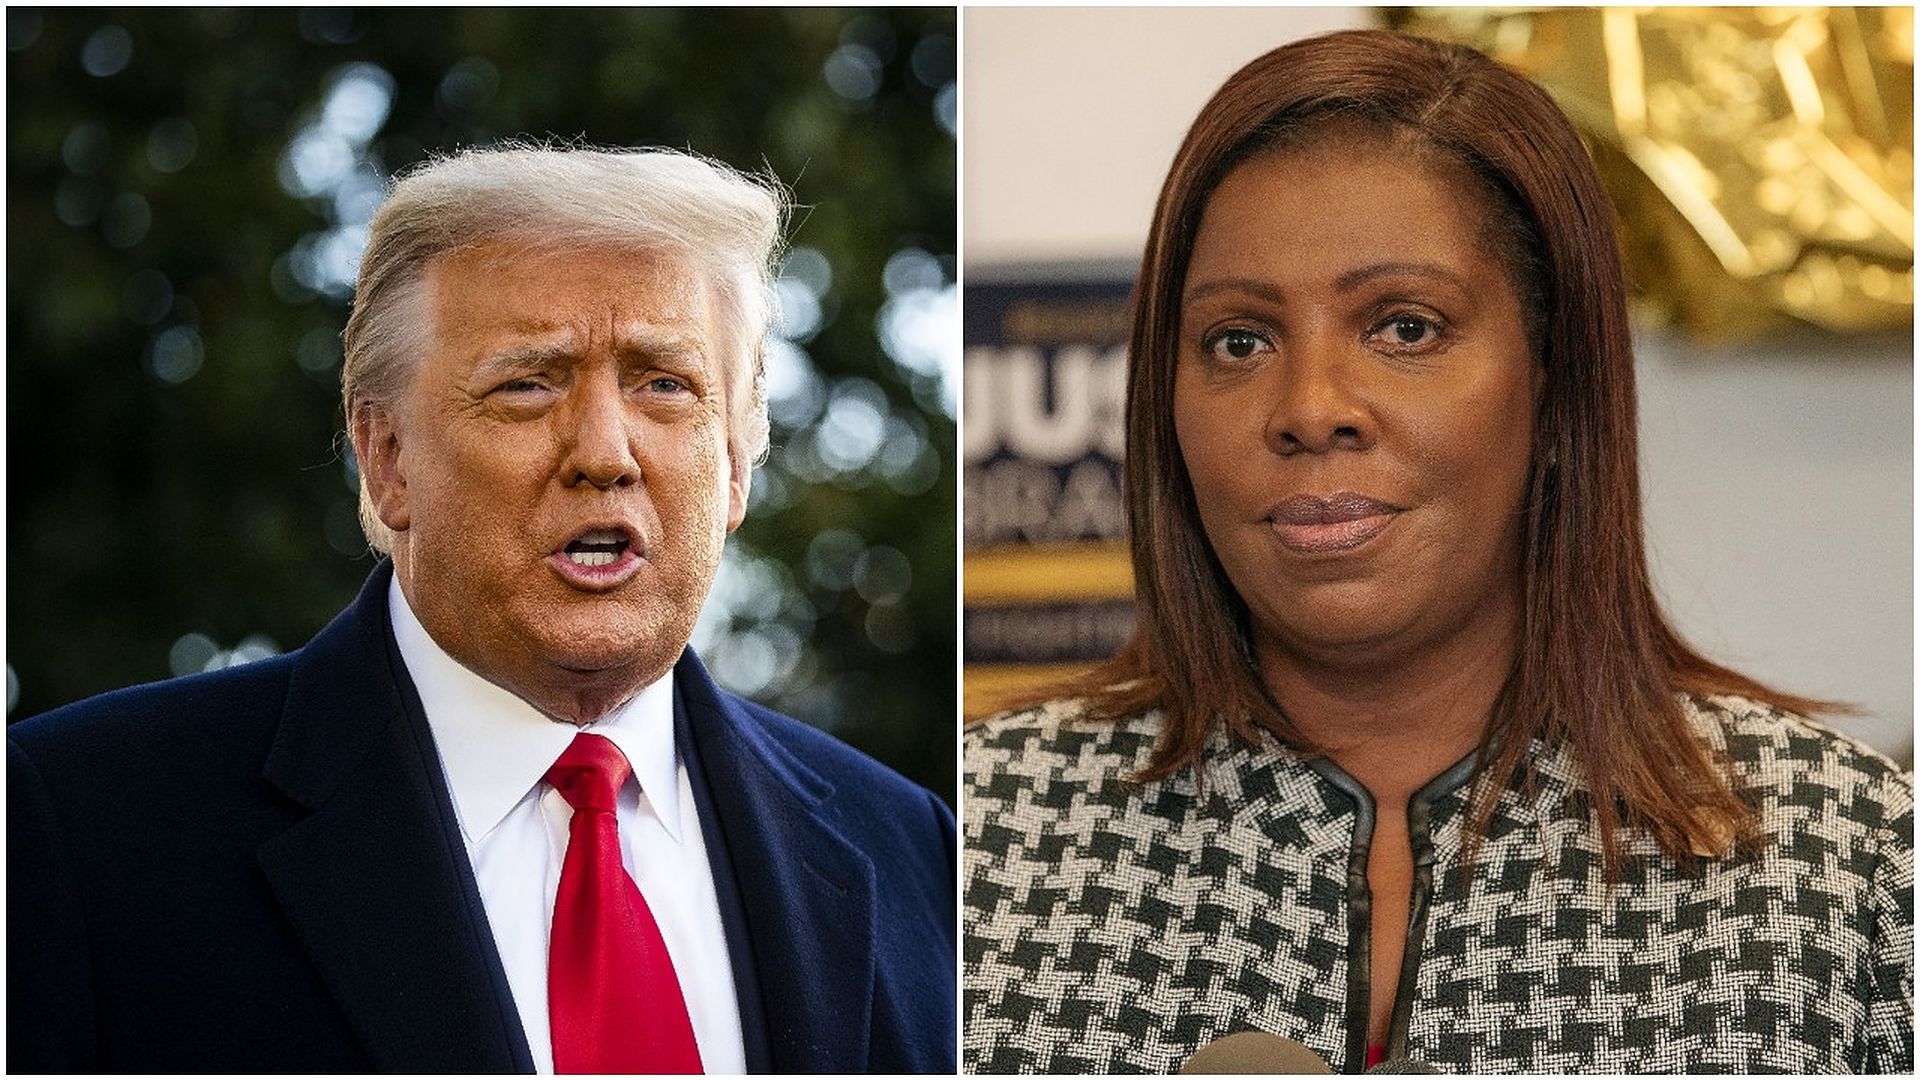 Combination images of former President Trump and New York State Attorney General Letitia James 